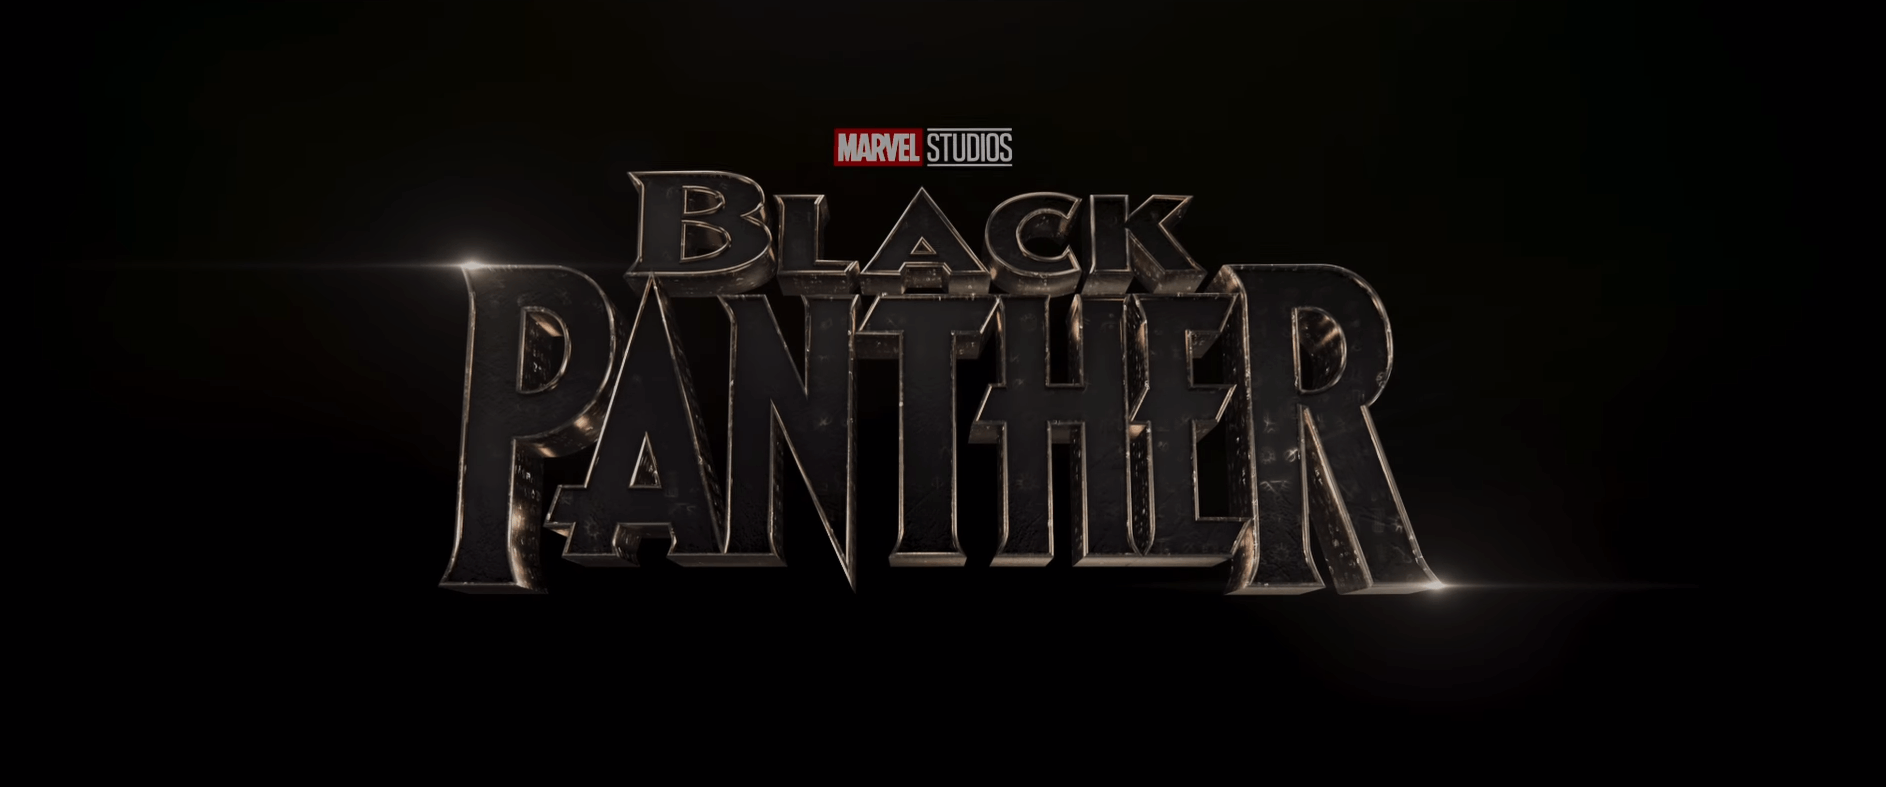 Marvel's Black Panther HD Picture Wallpaper Download Free